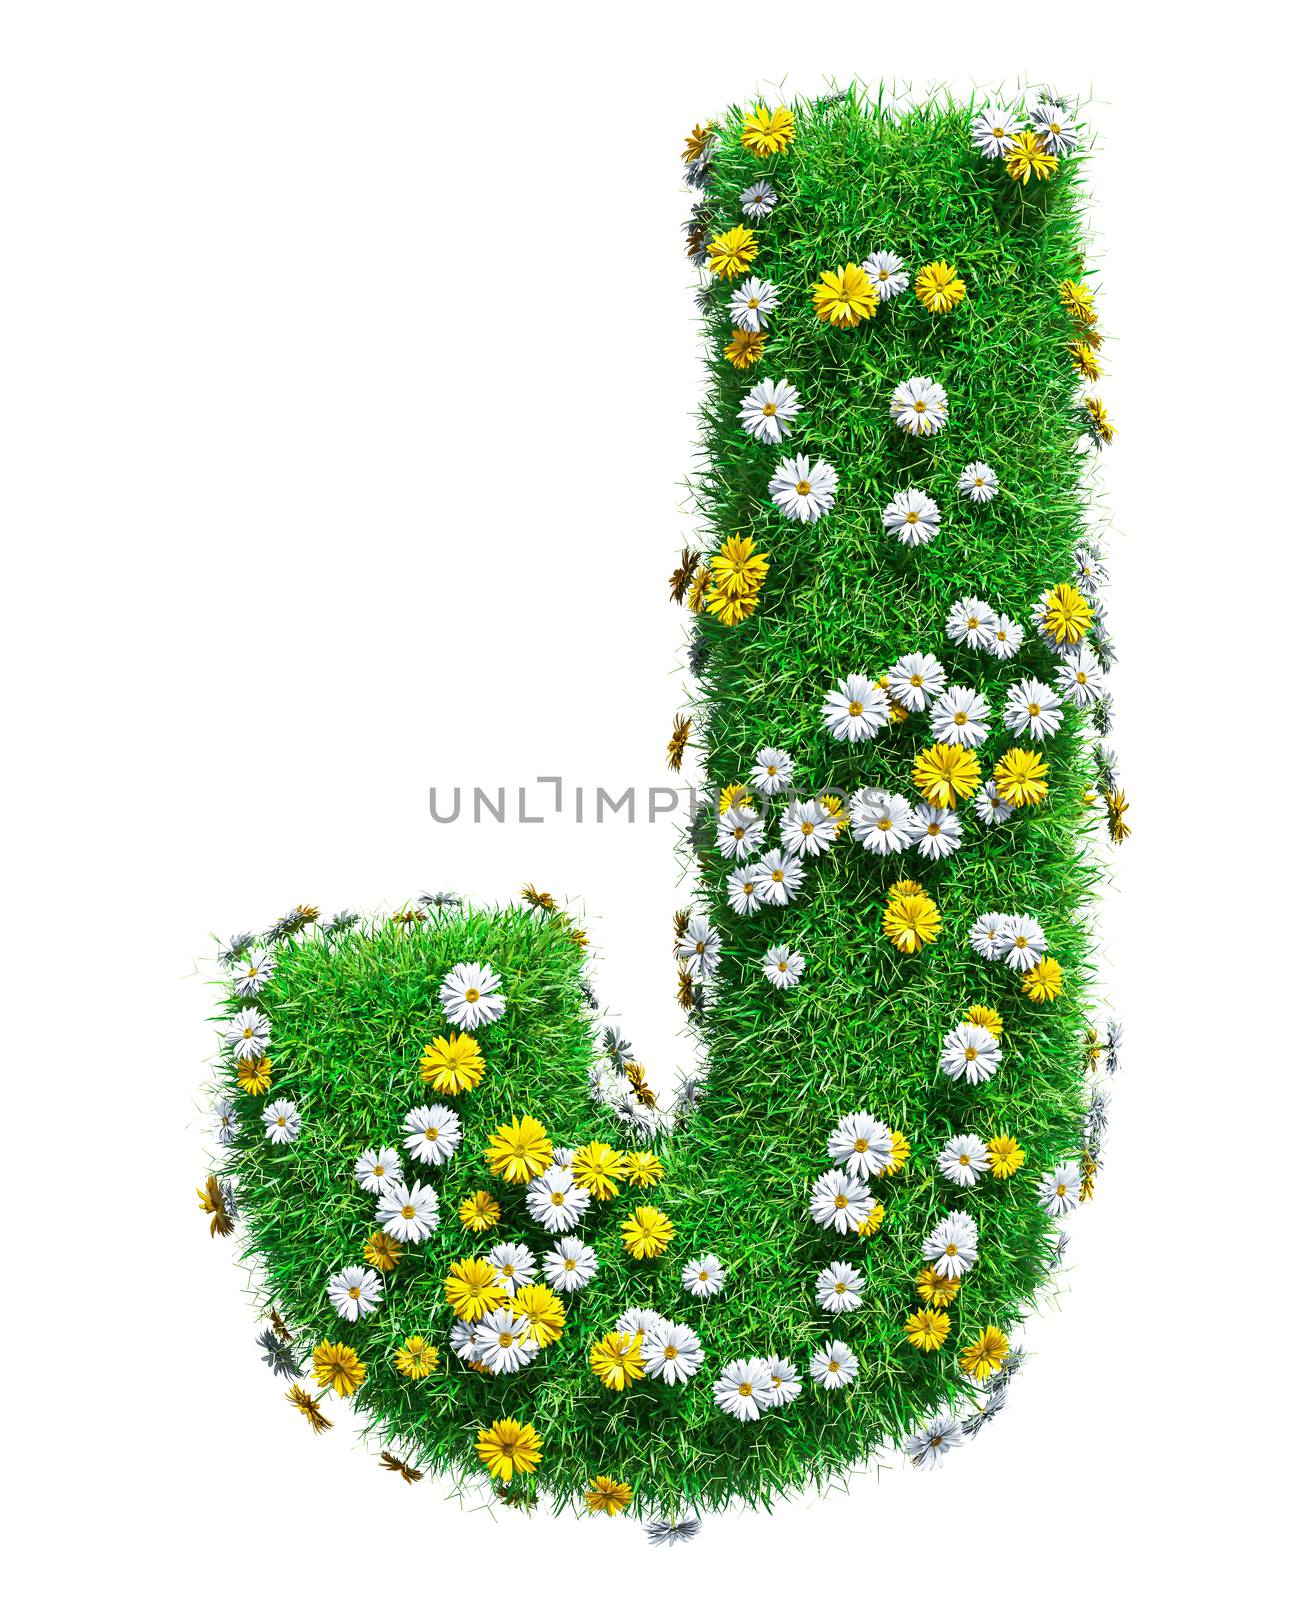 Letter J Of Green Grass And Flowers. Isolated On White Background. Font For Your Design. 3D Illustration